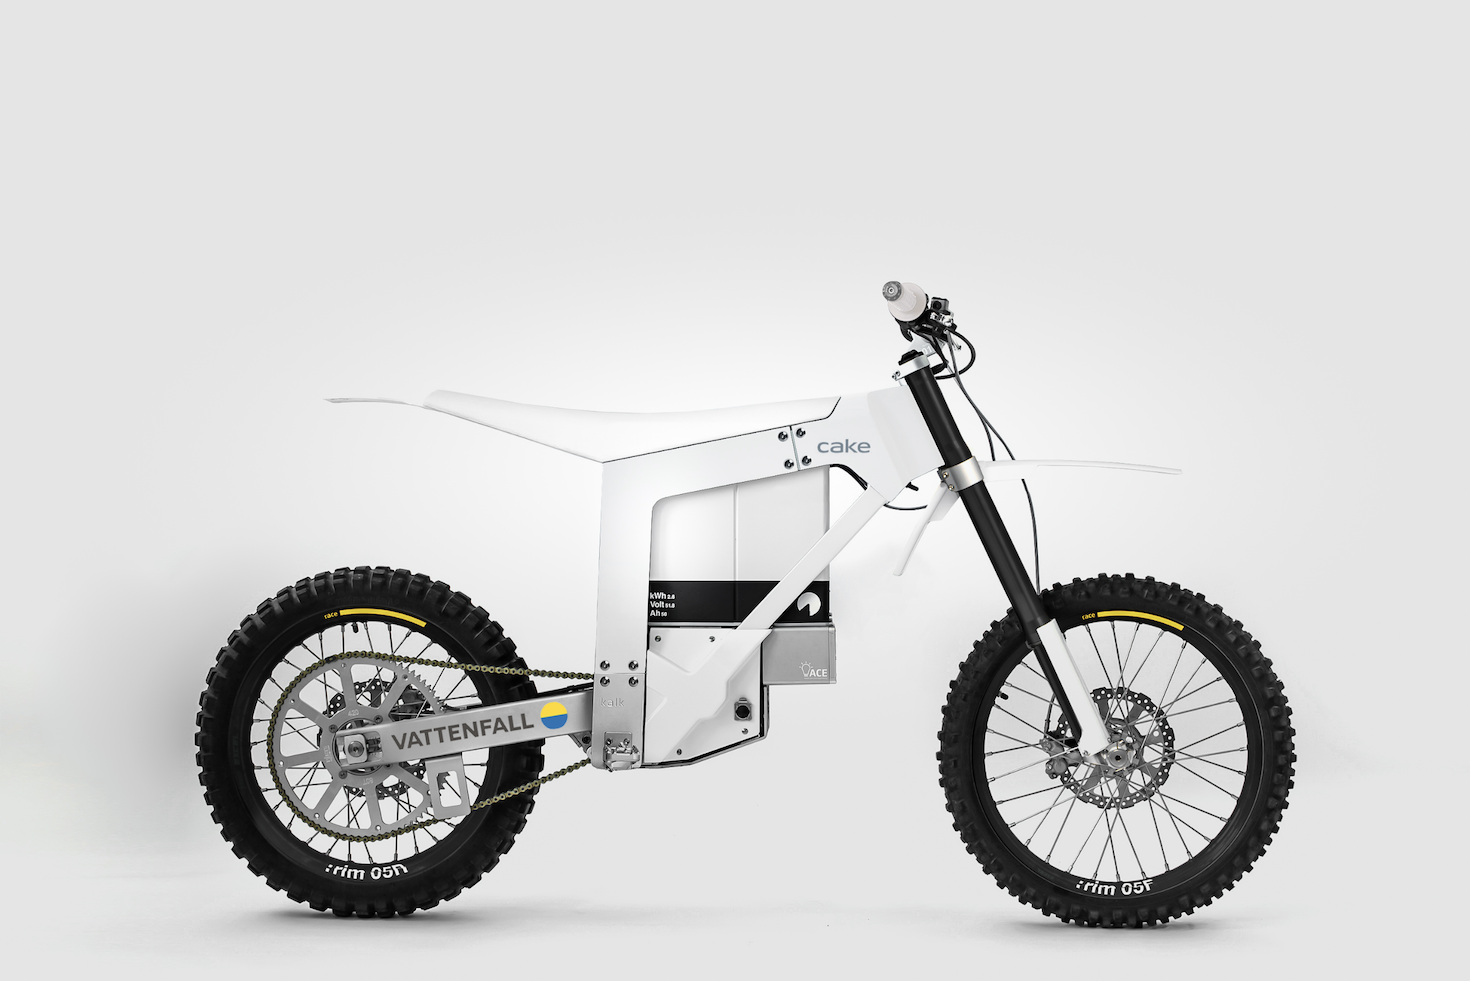 Vattenfall and electric bike firm Cake team on ‘fossil-free’ motorcycle